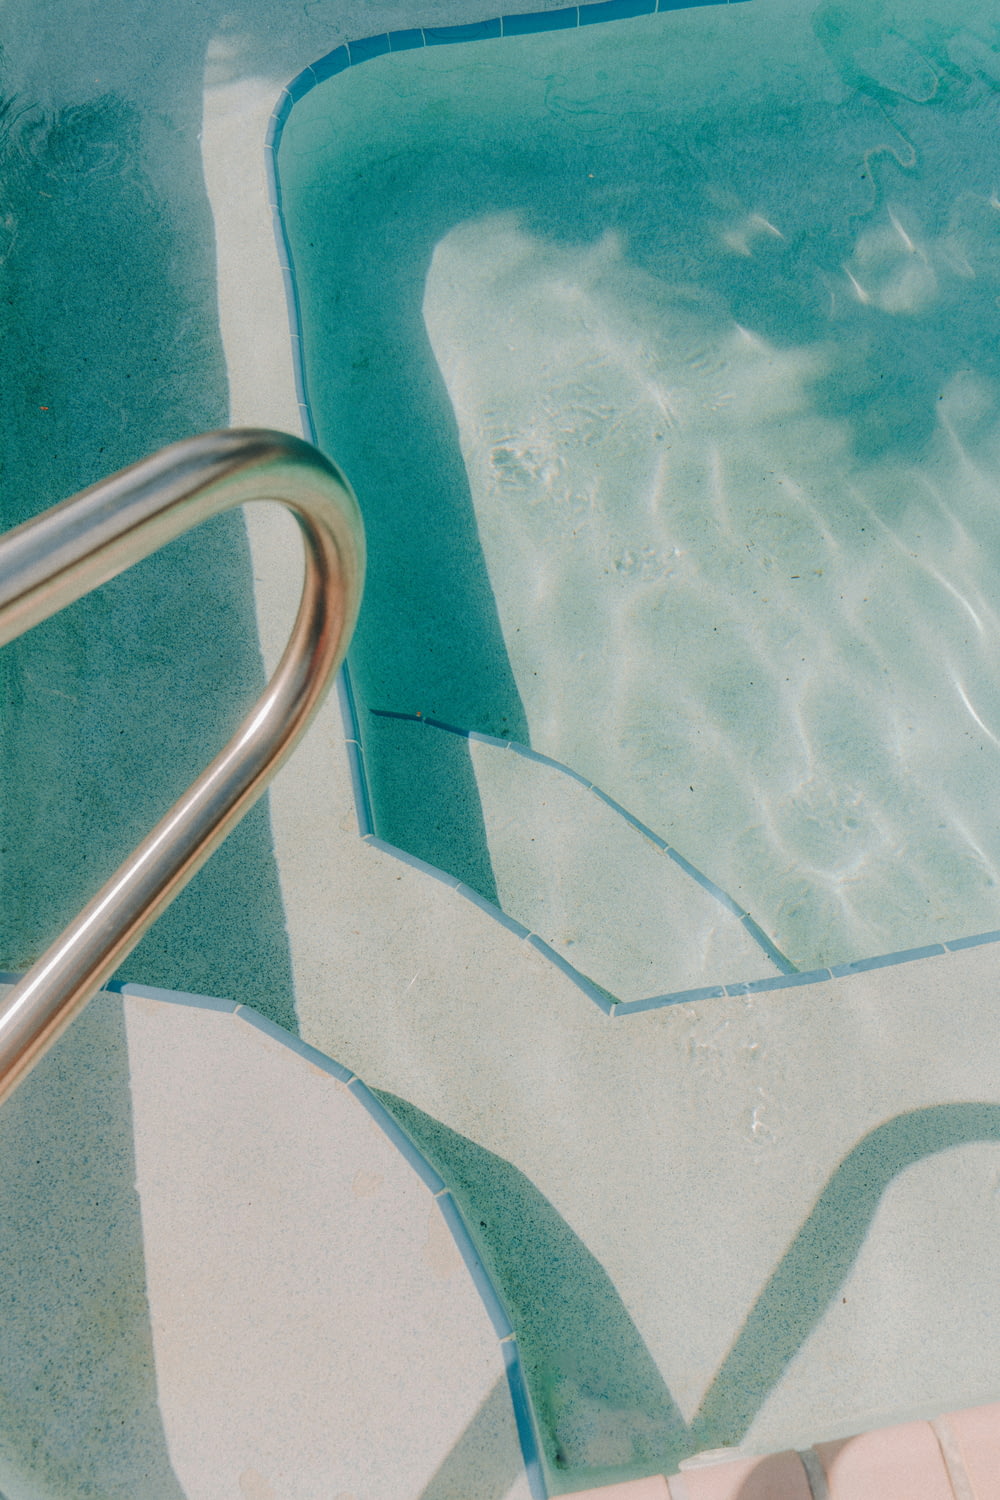 a close up of a pool with a metal hand rail